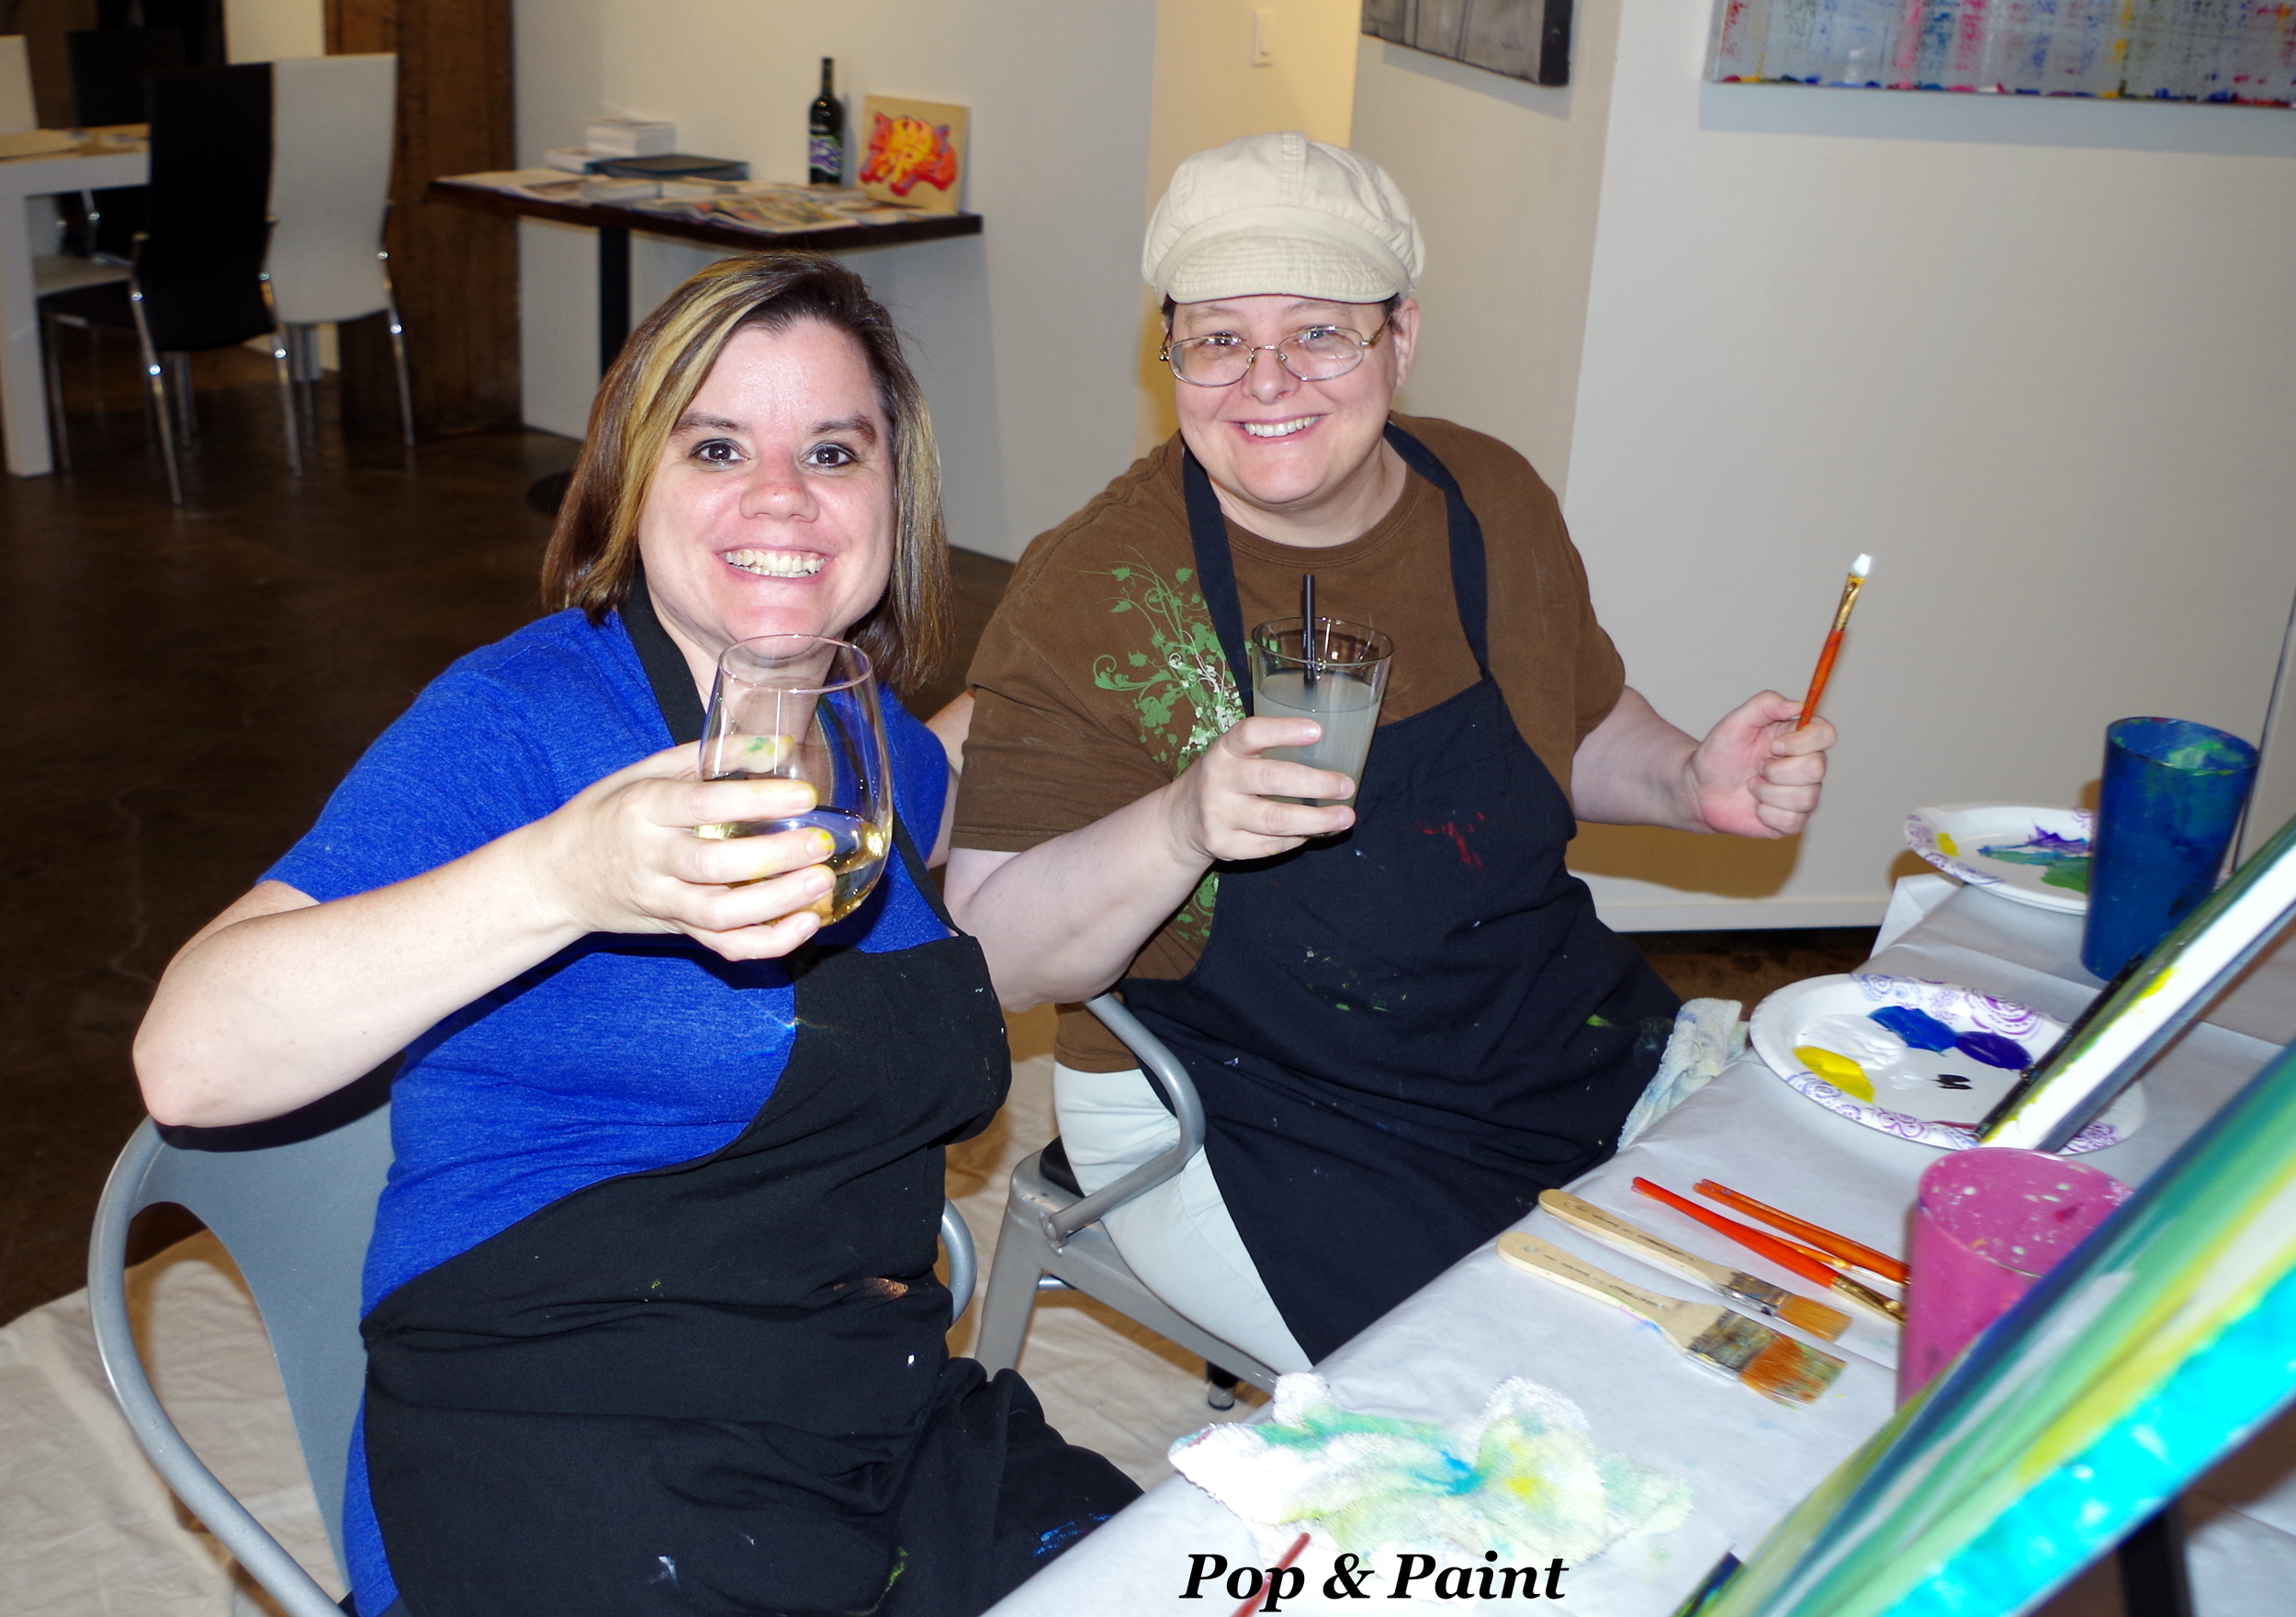 Cheers to painting with Pop & Paint!